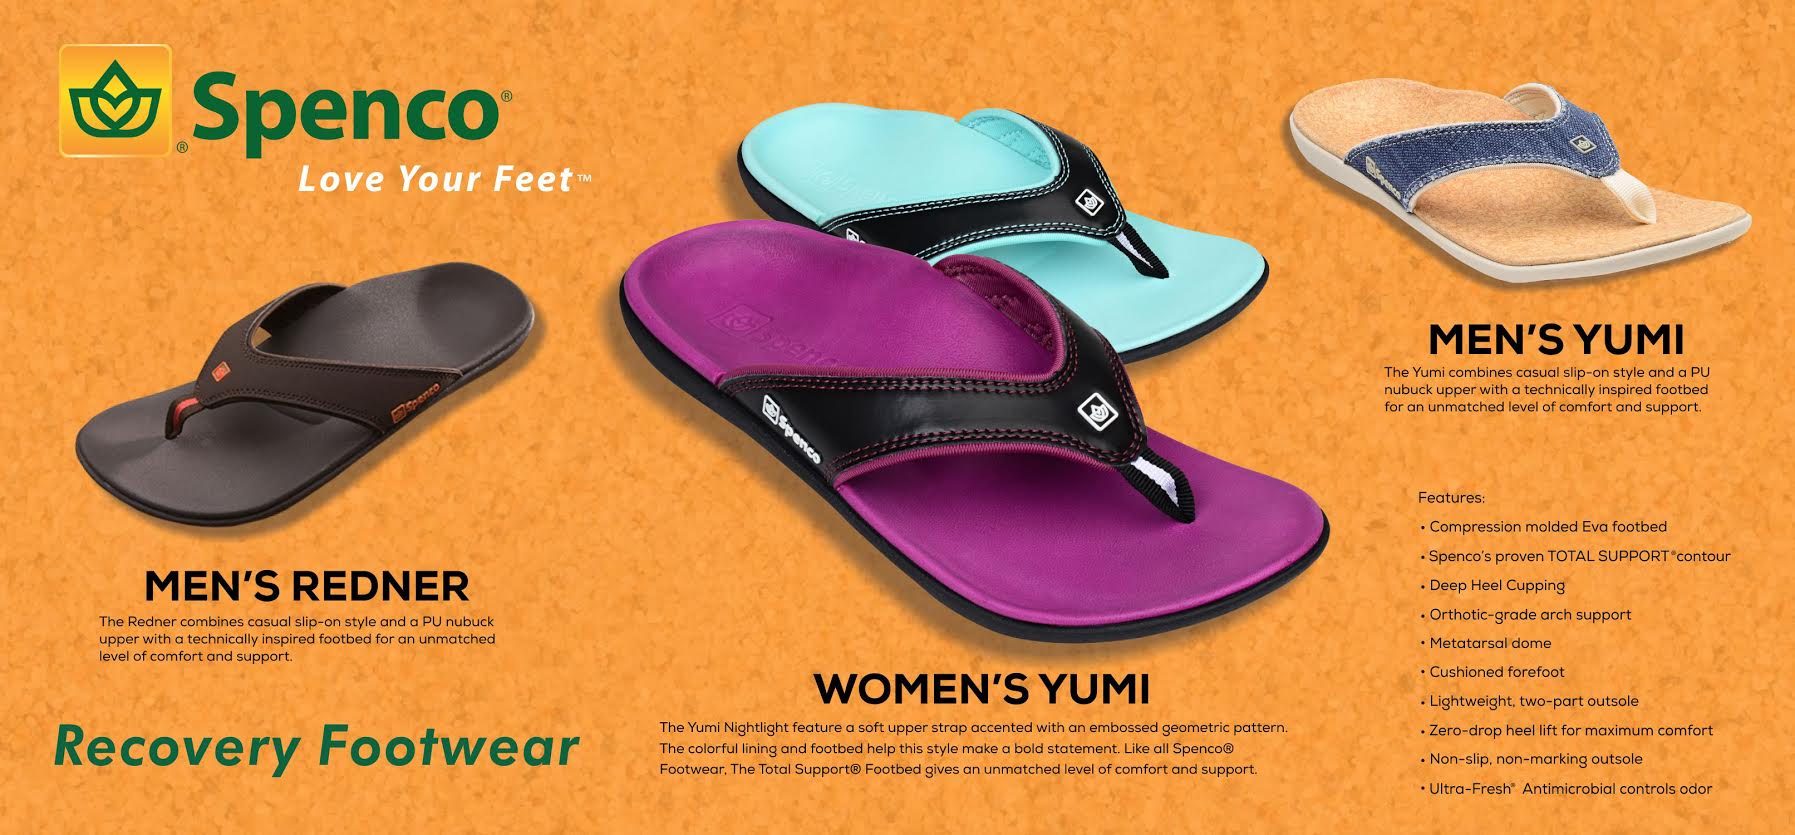 SPENCO Yumi recovery slippers now in 